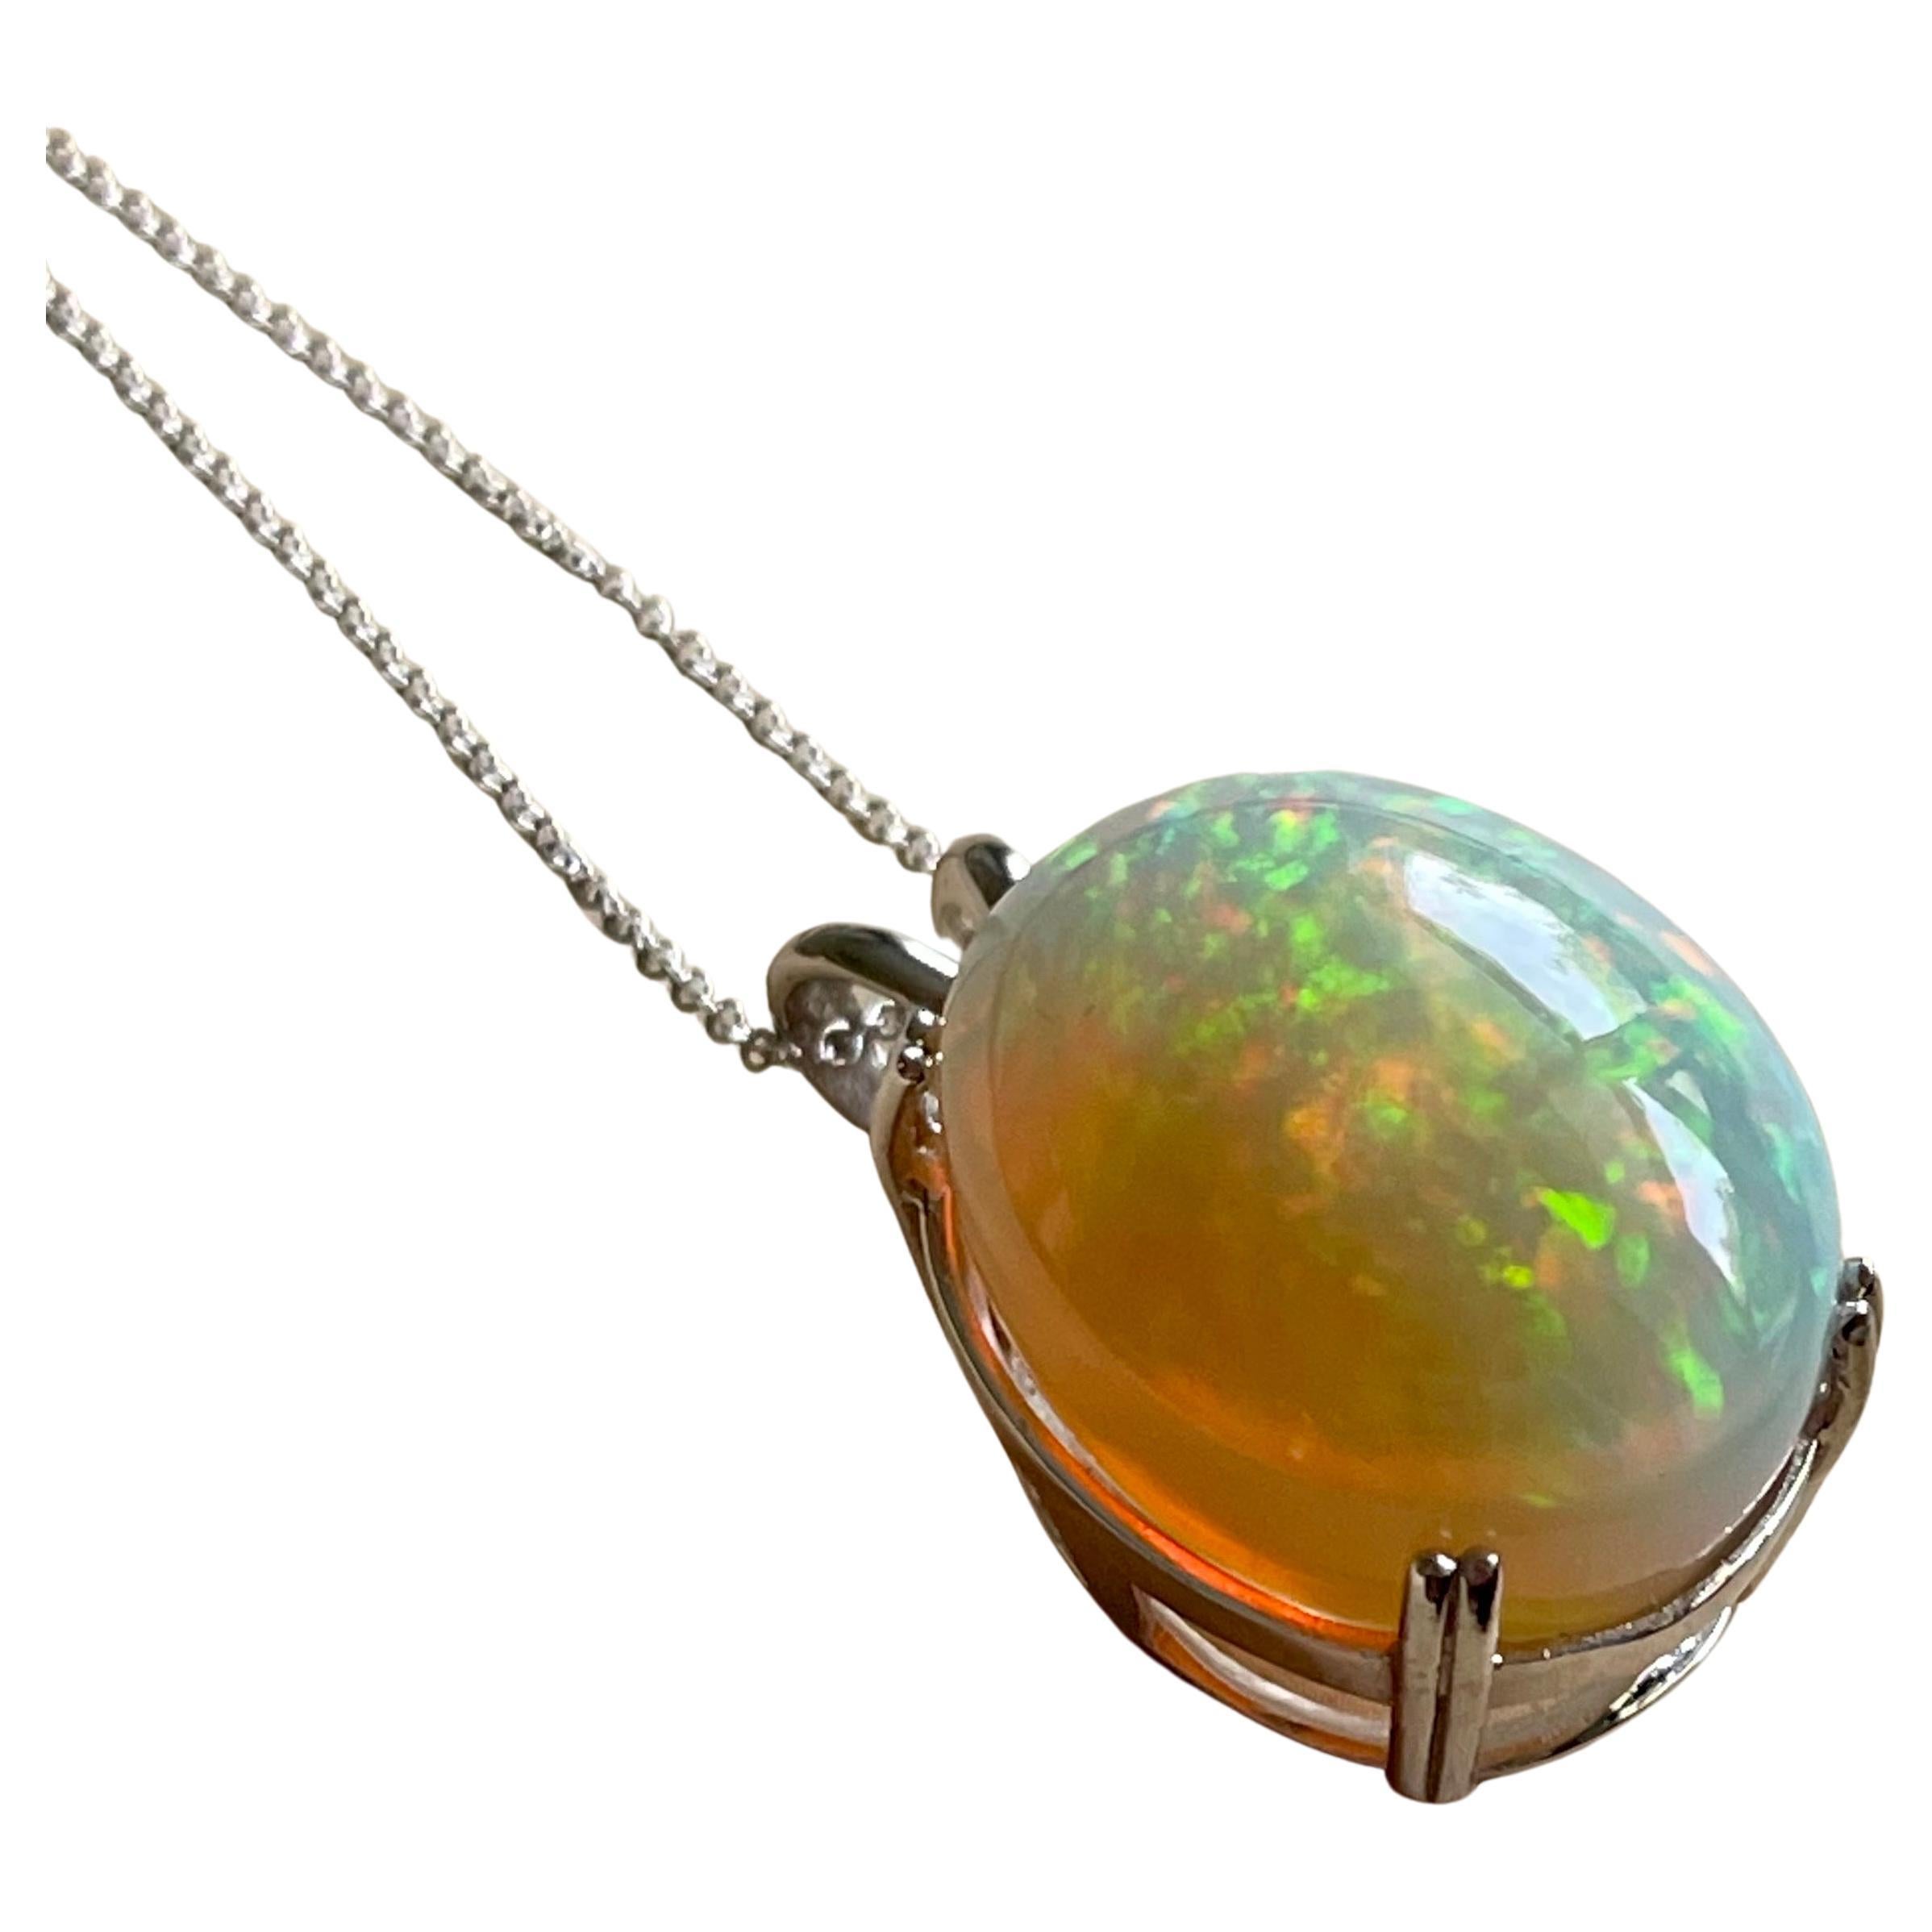 Approximately 40 Carat Oval Ethiopian  Opal Pendant /  Necklace 14 Kt white  Gold Necklace with Chain
This spectacular Pendant Necklace consisting of a single Oval Shape Ethiopian Opal Approximately 40 Carat. 
25X19MM size of opal
very clean Stone